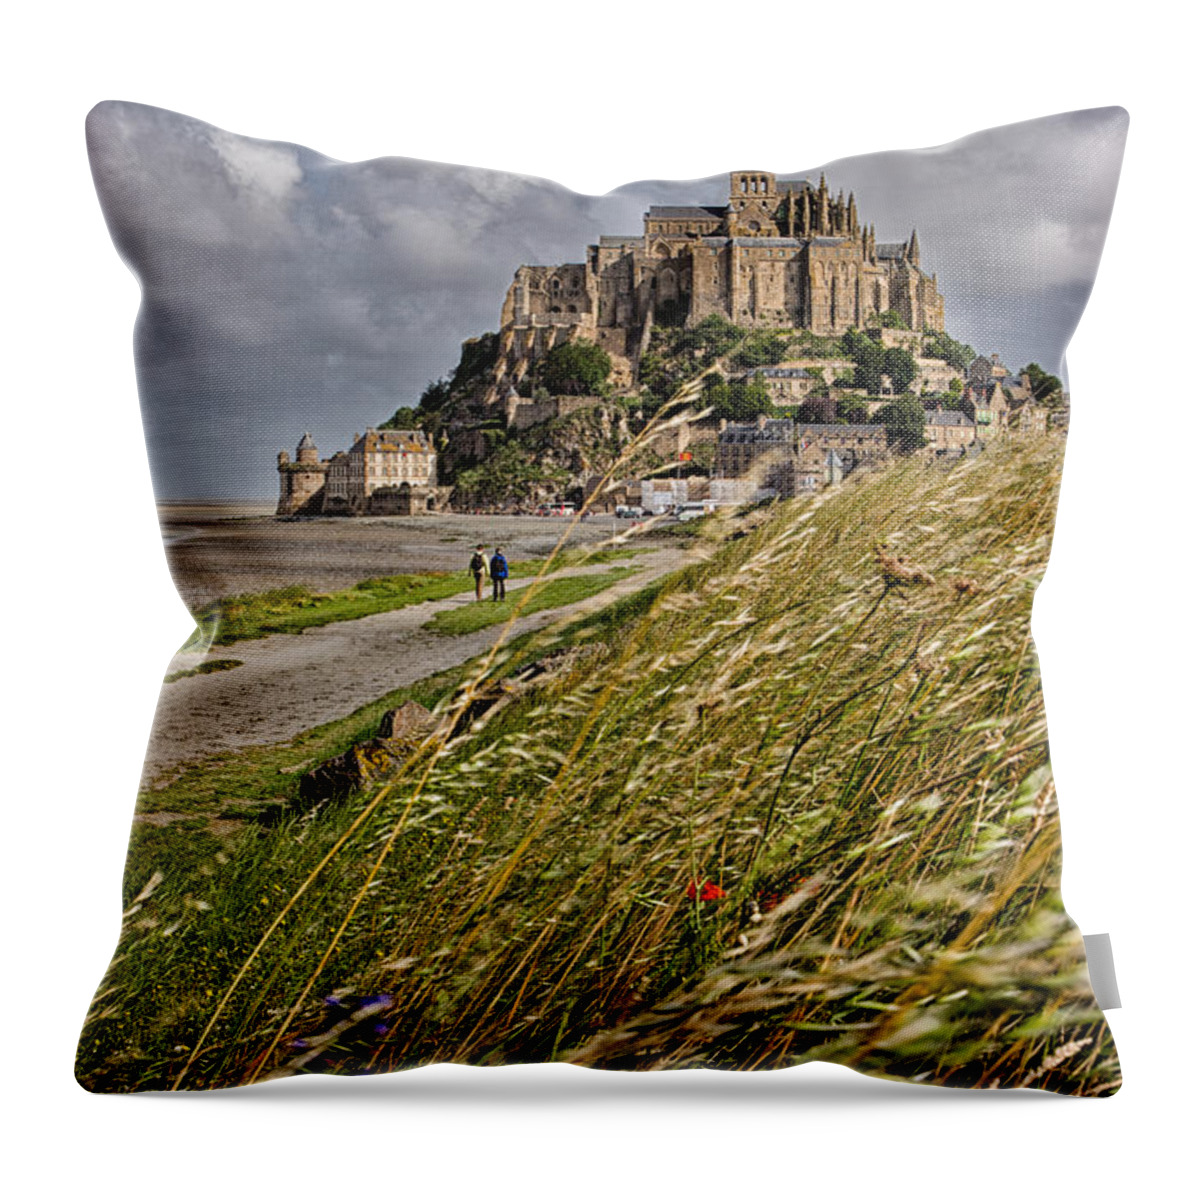 Le Mont St Michel Throw Pillow featuring the photograph Le Mont St Michel by Nigel R Bell